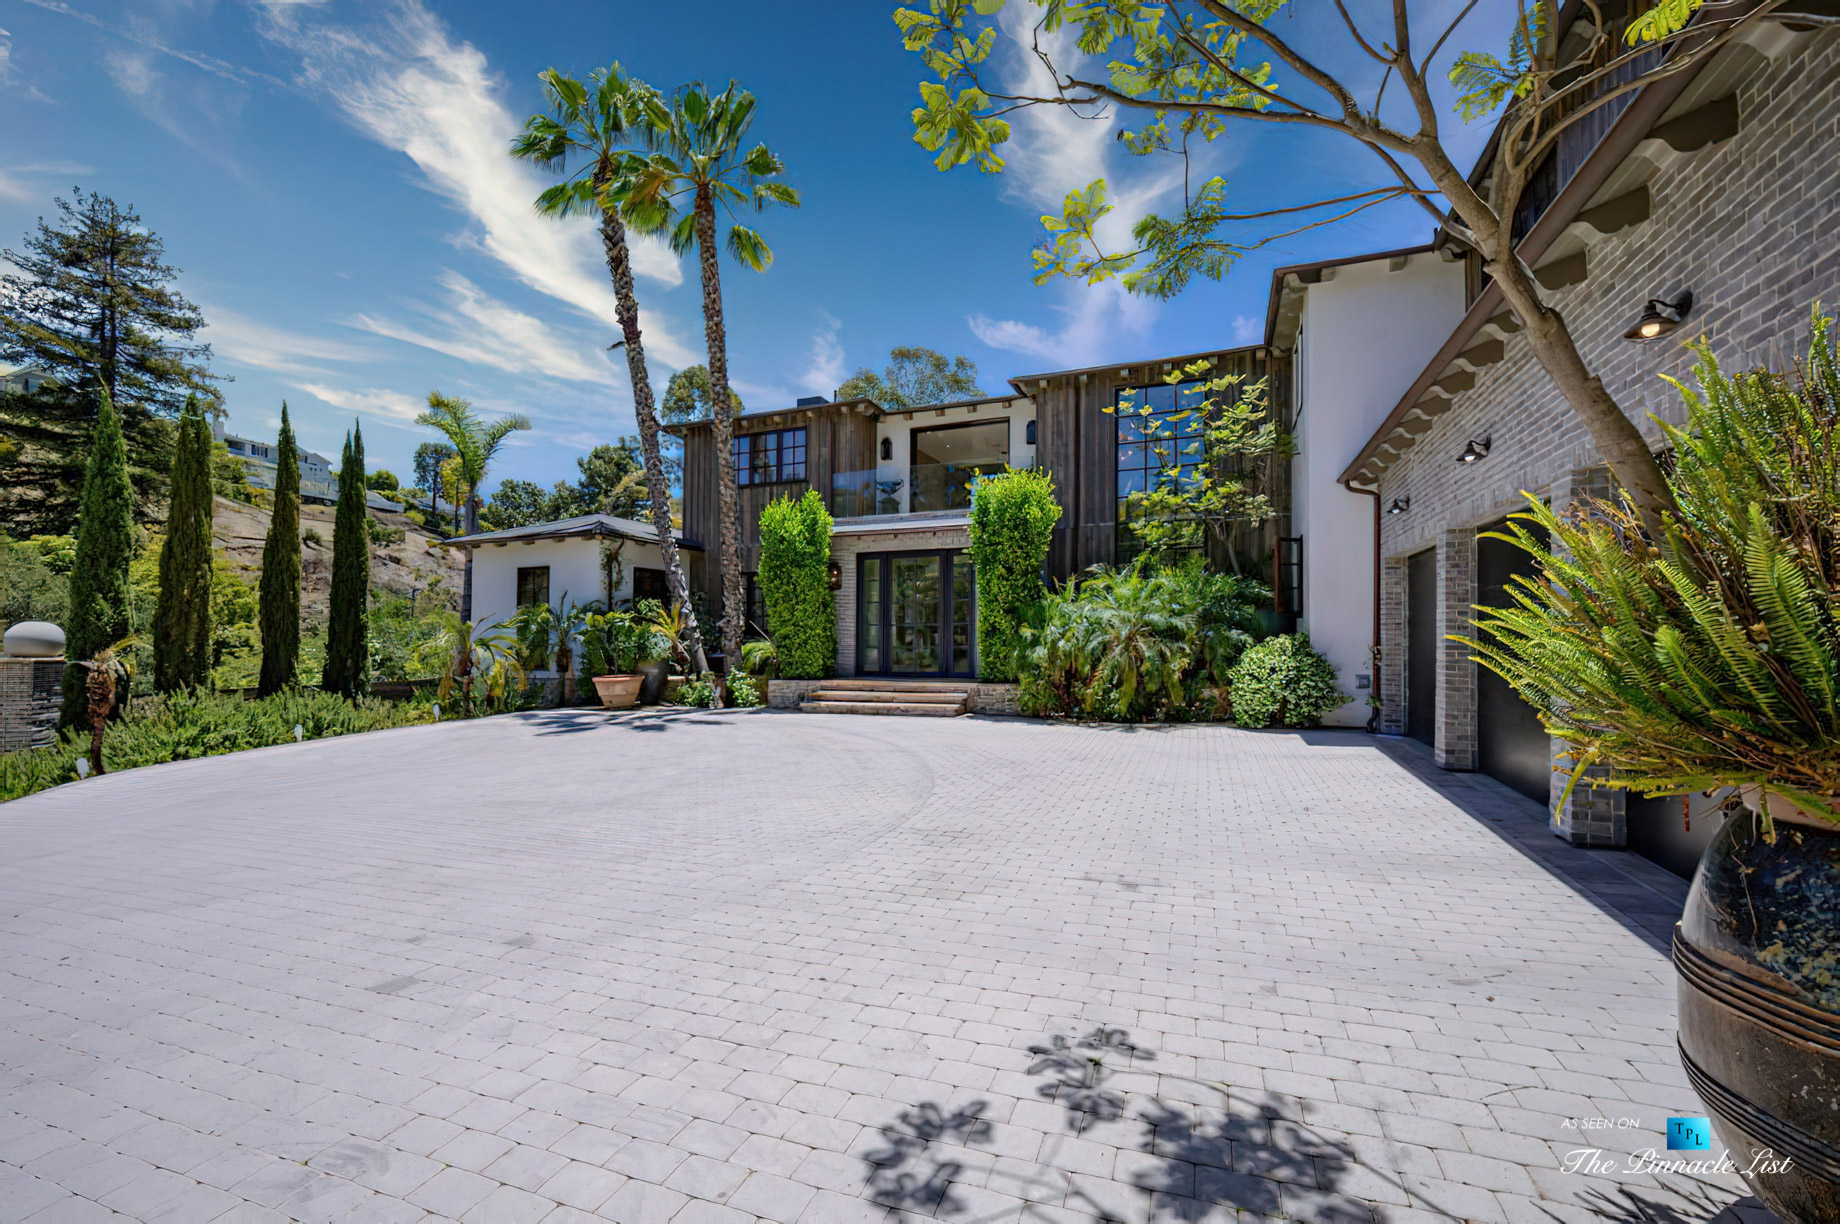 1105 Rivas Canyon Rd, Pacific Palisades, CA, USA - Luxury Real Estate - Front Entrance